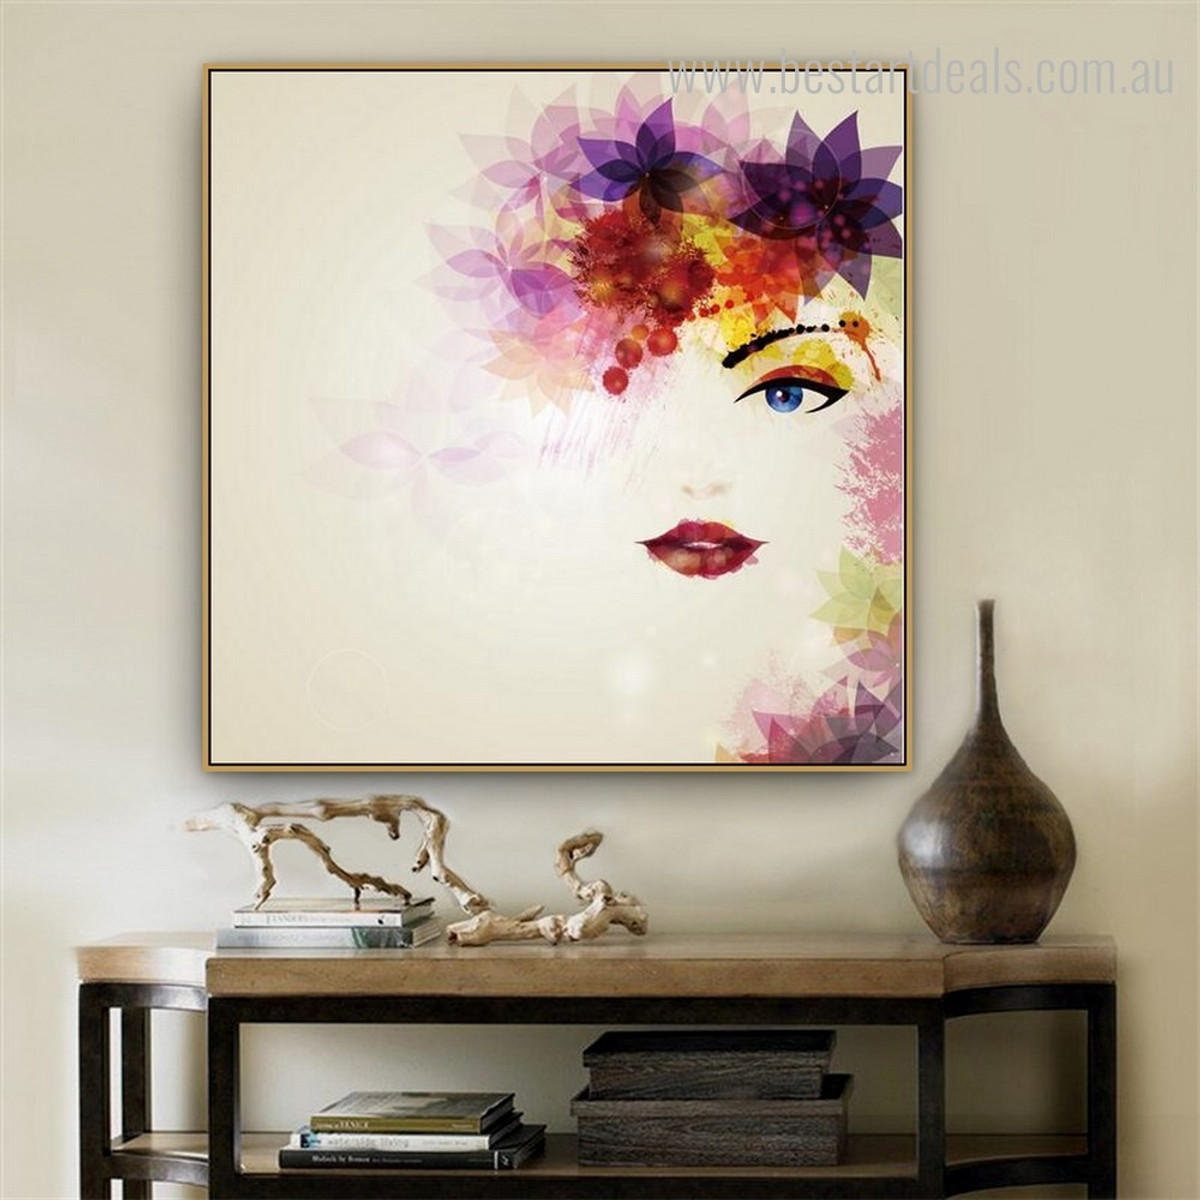 Woman Mouth Modern Abstract Framed Portraiture Image Canvas Print for Room Wall Decor